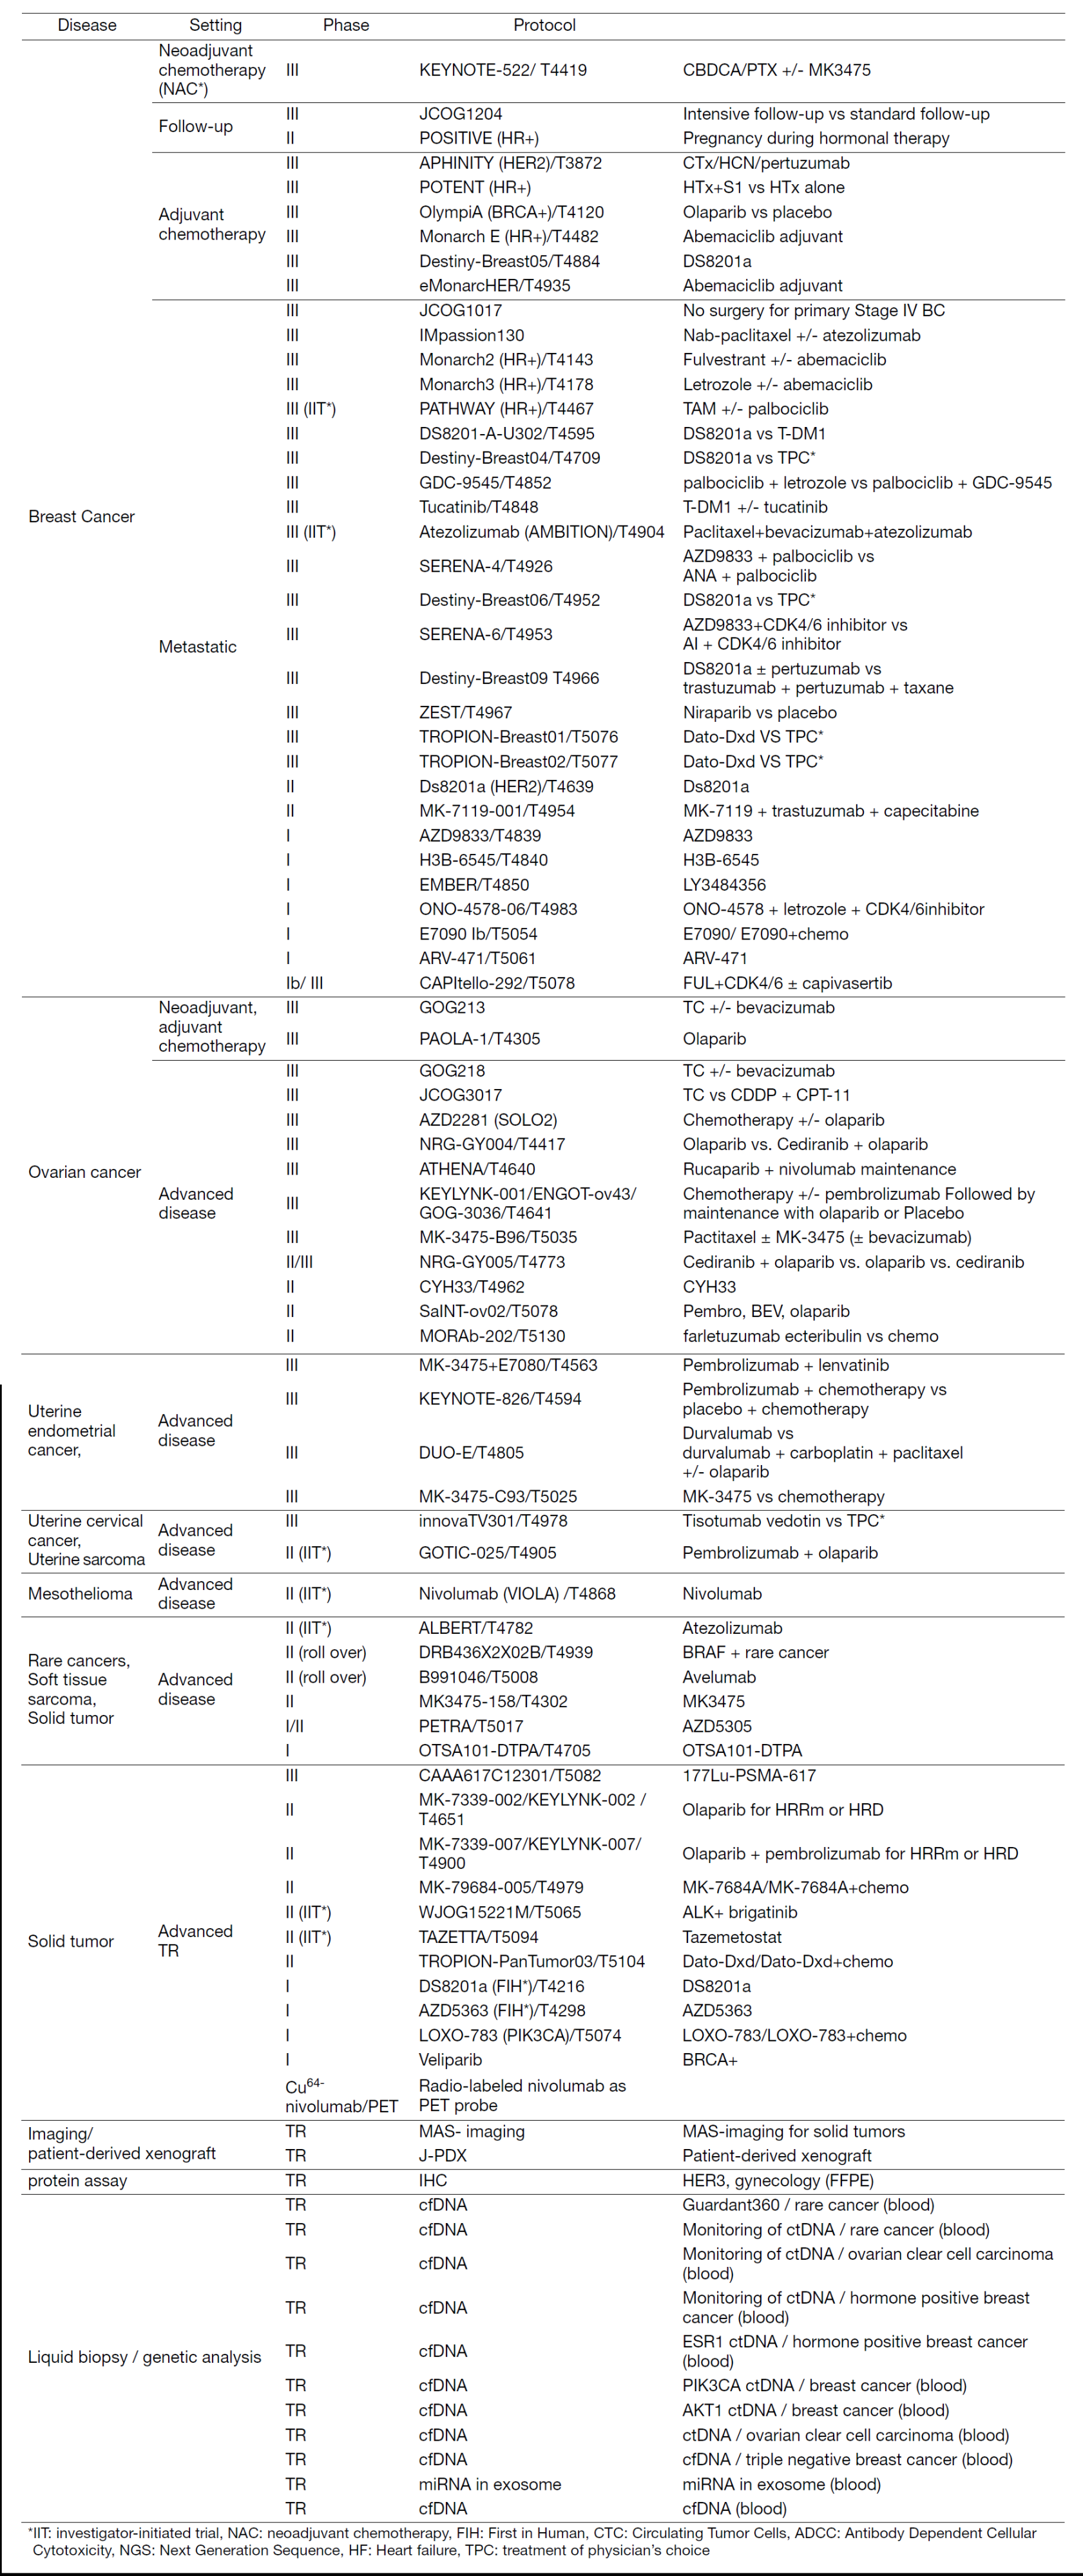 Table 2. Active Clinical Trials (April 2022 to March 2023)